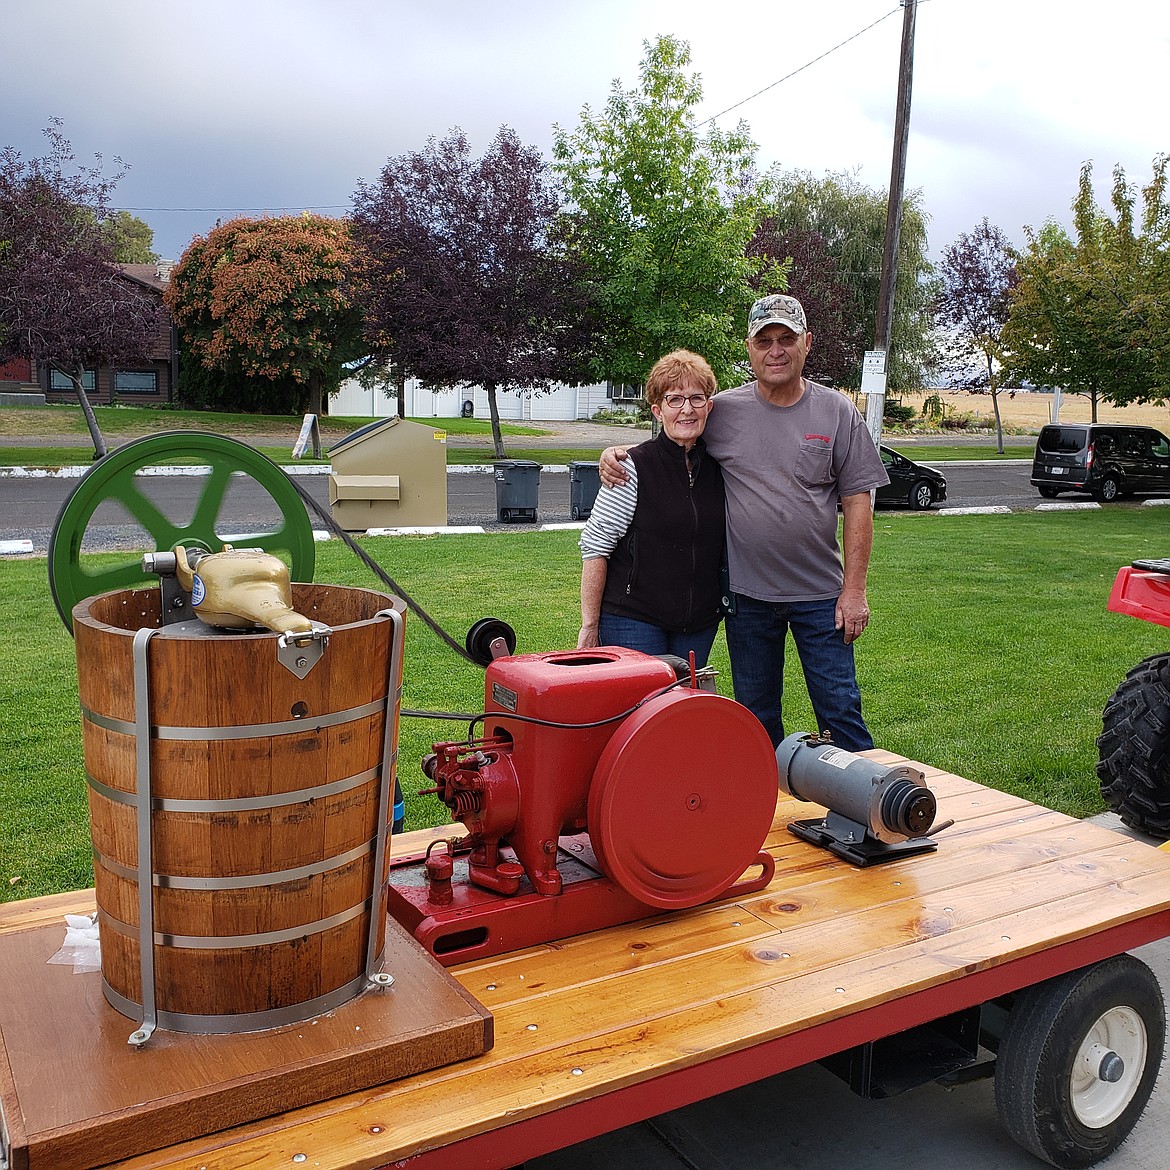 This 1930s-vintage diesel-powered ice cream maker owned by Erickson Tank & Pump will turn out five gallons of ice cream at a time Friday at the George Bluegrass Festival.